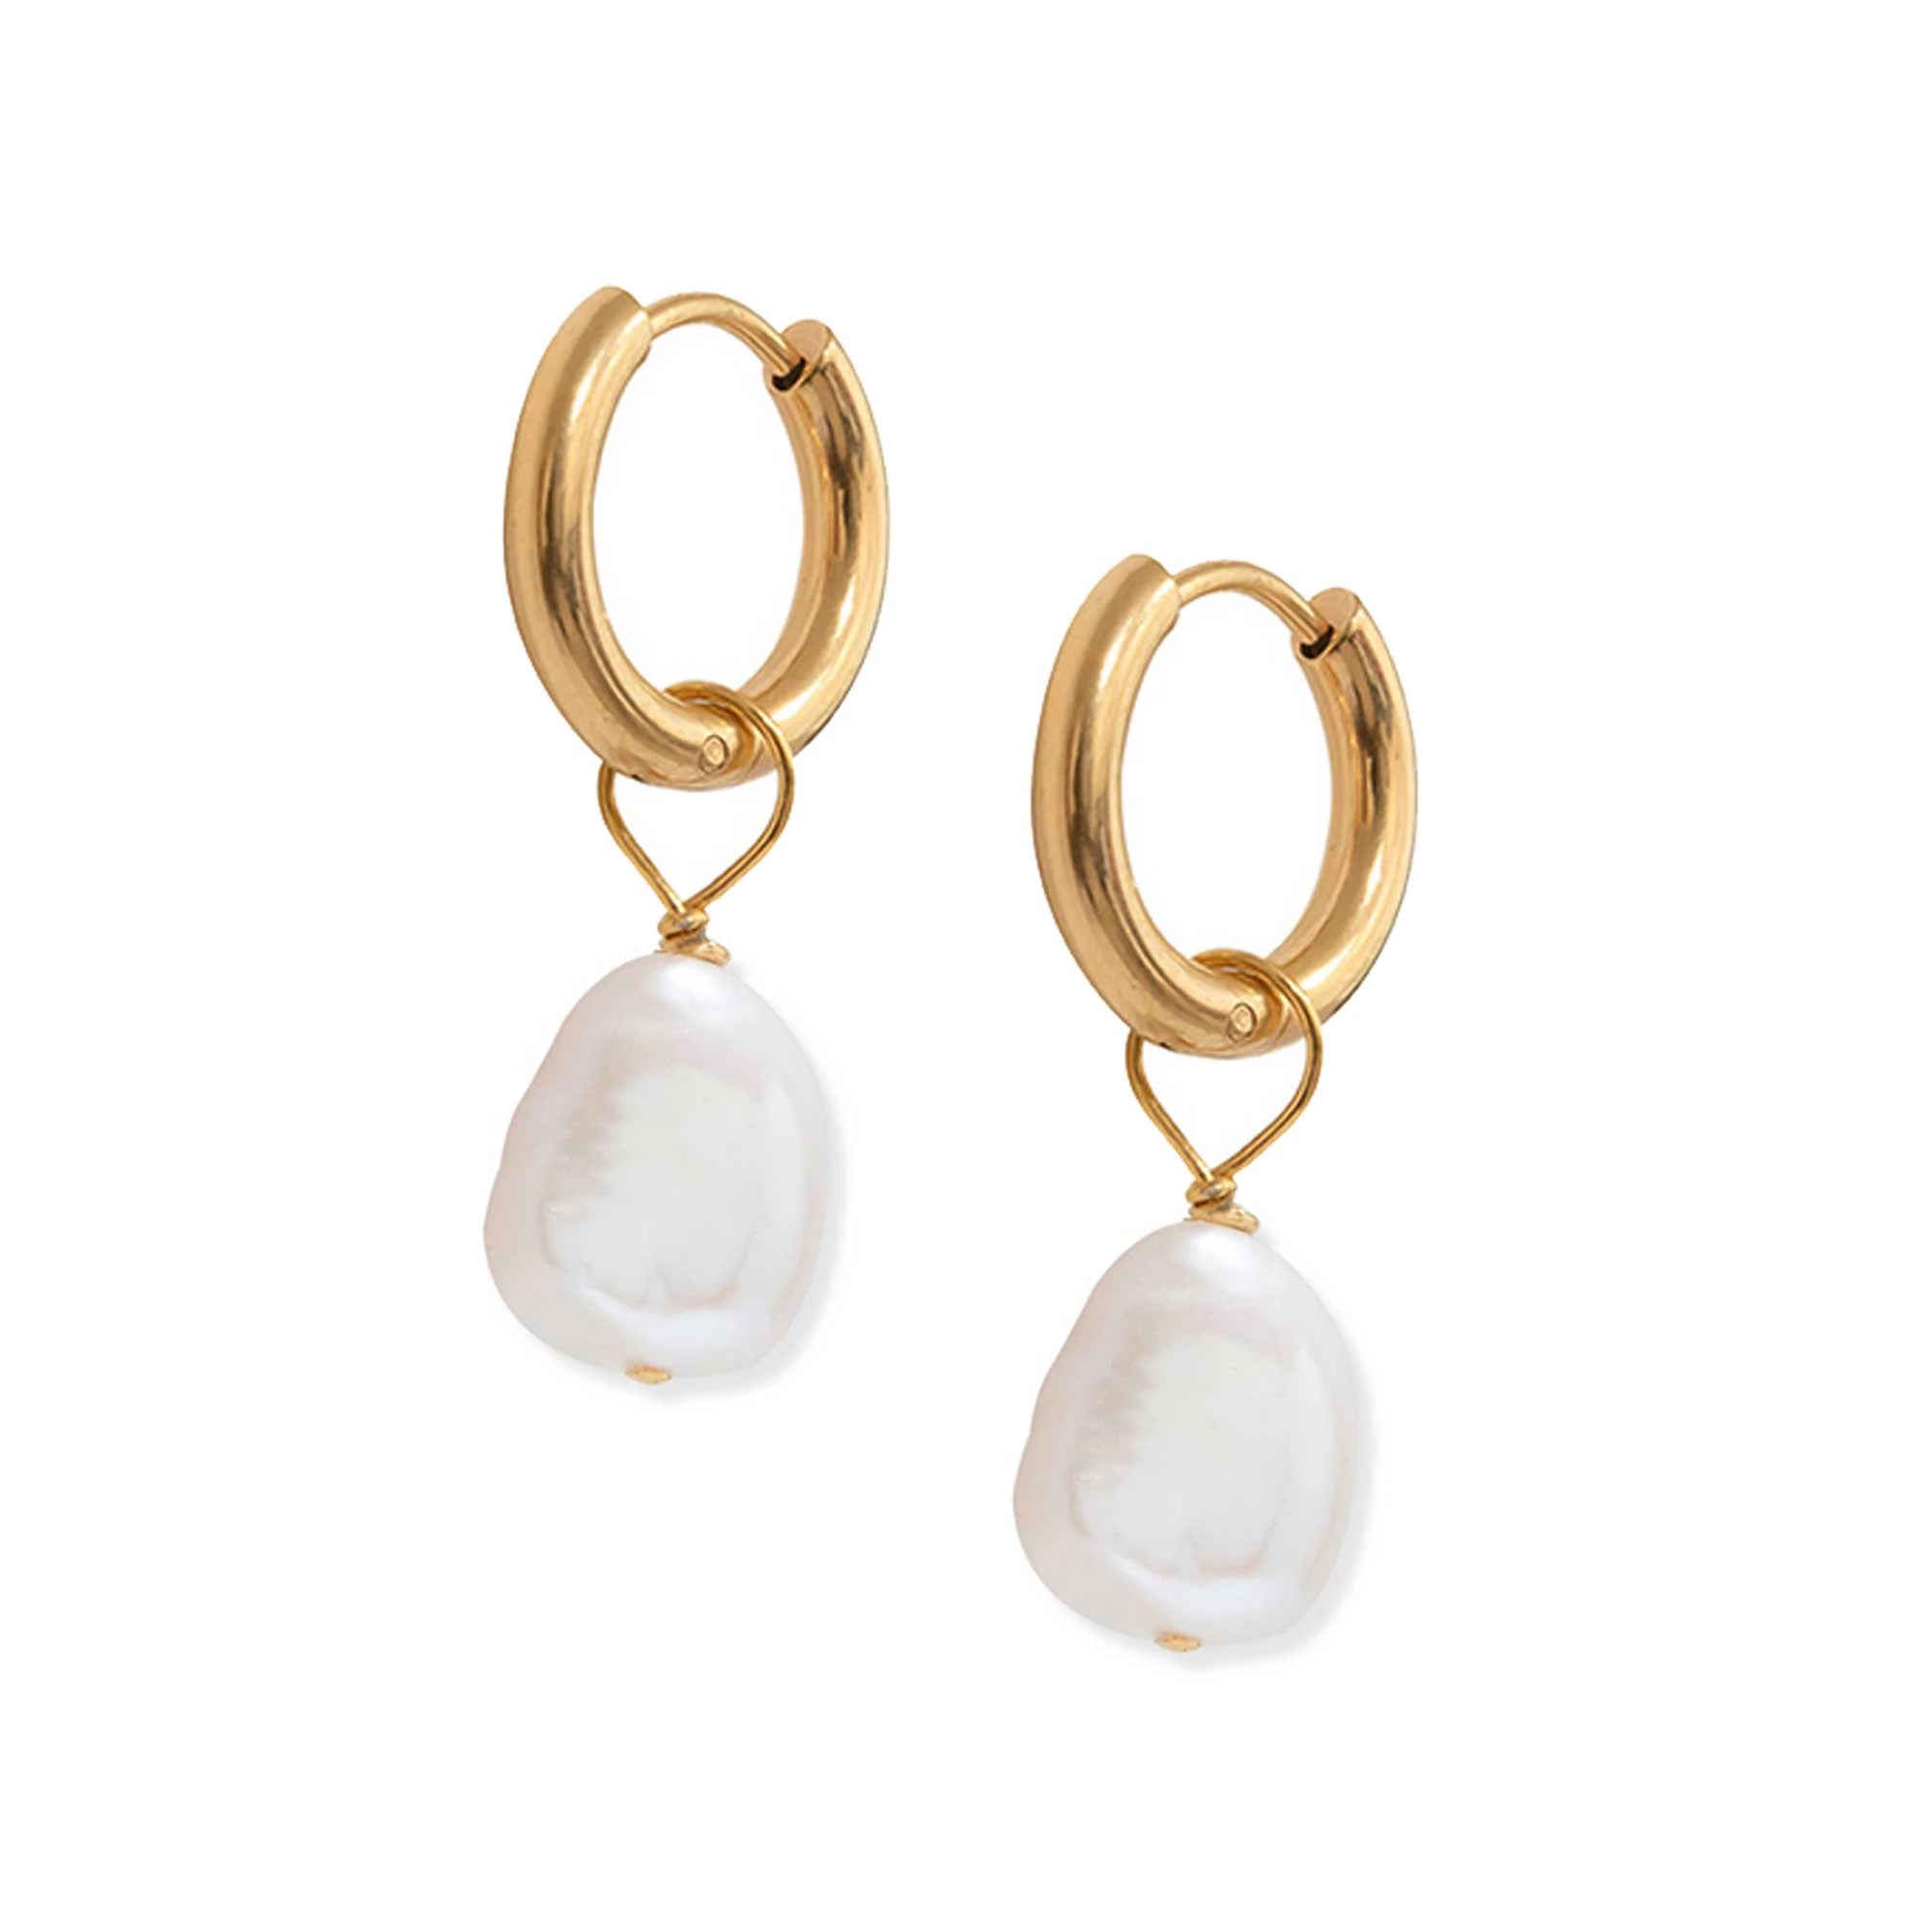 Pearl Hoops in Gold or Silver by A Weathered Penny - Lifestory